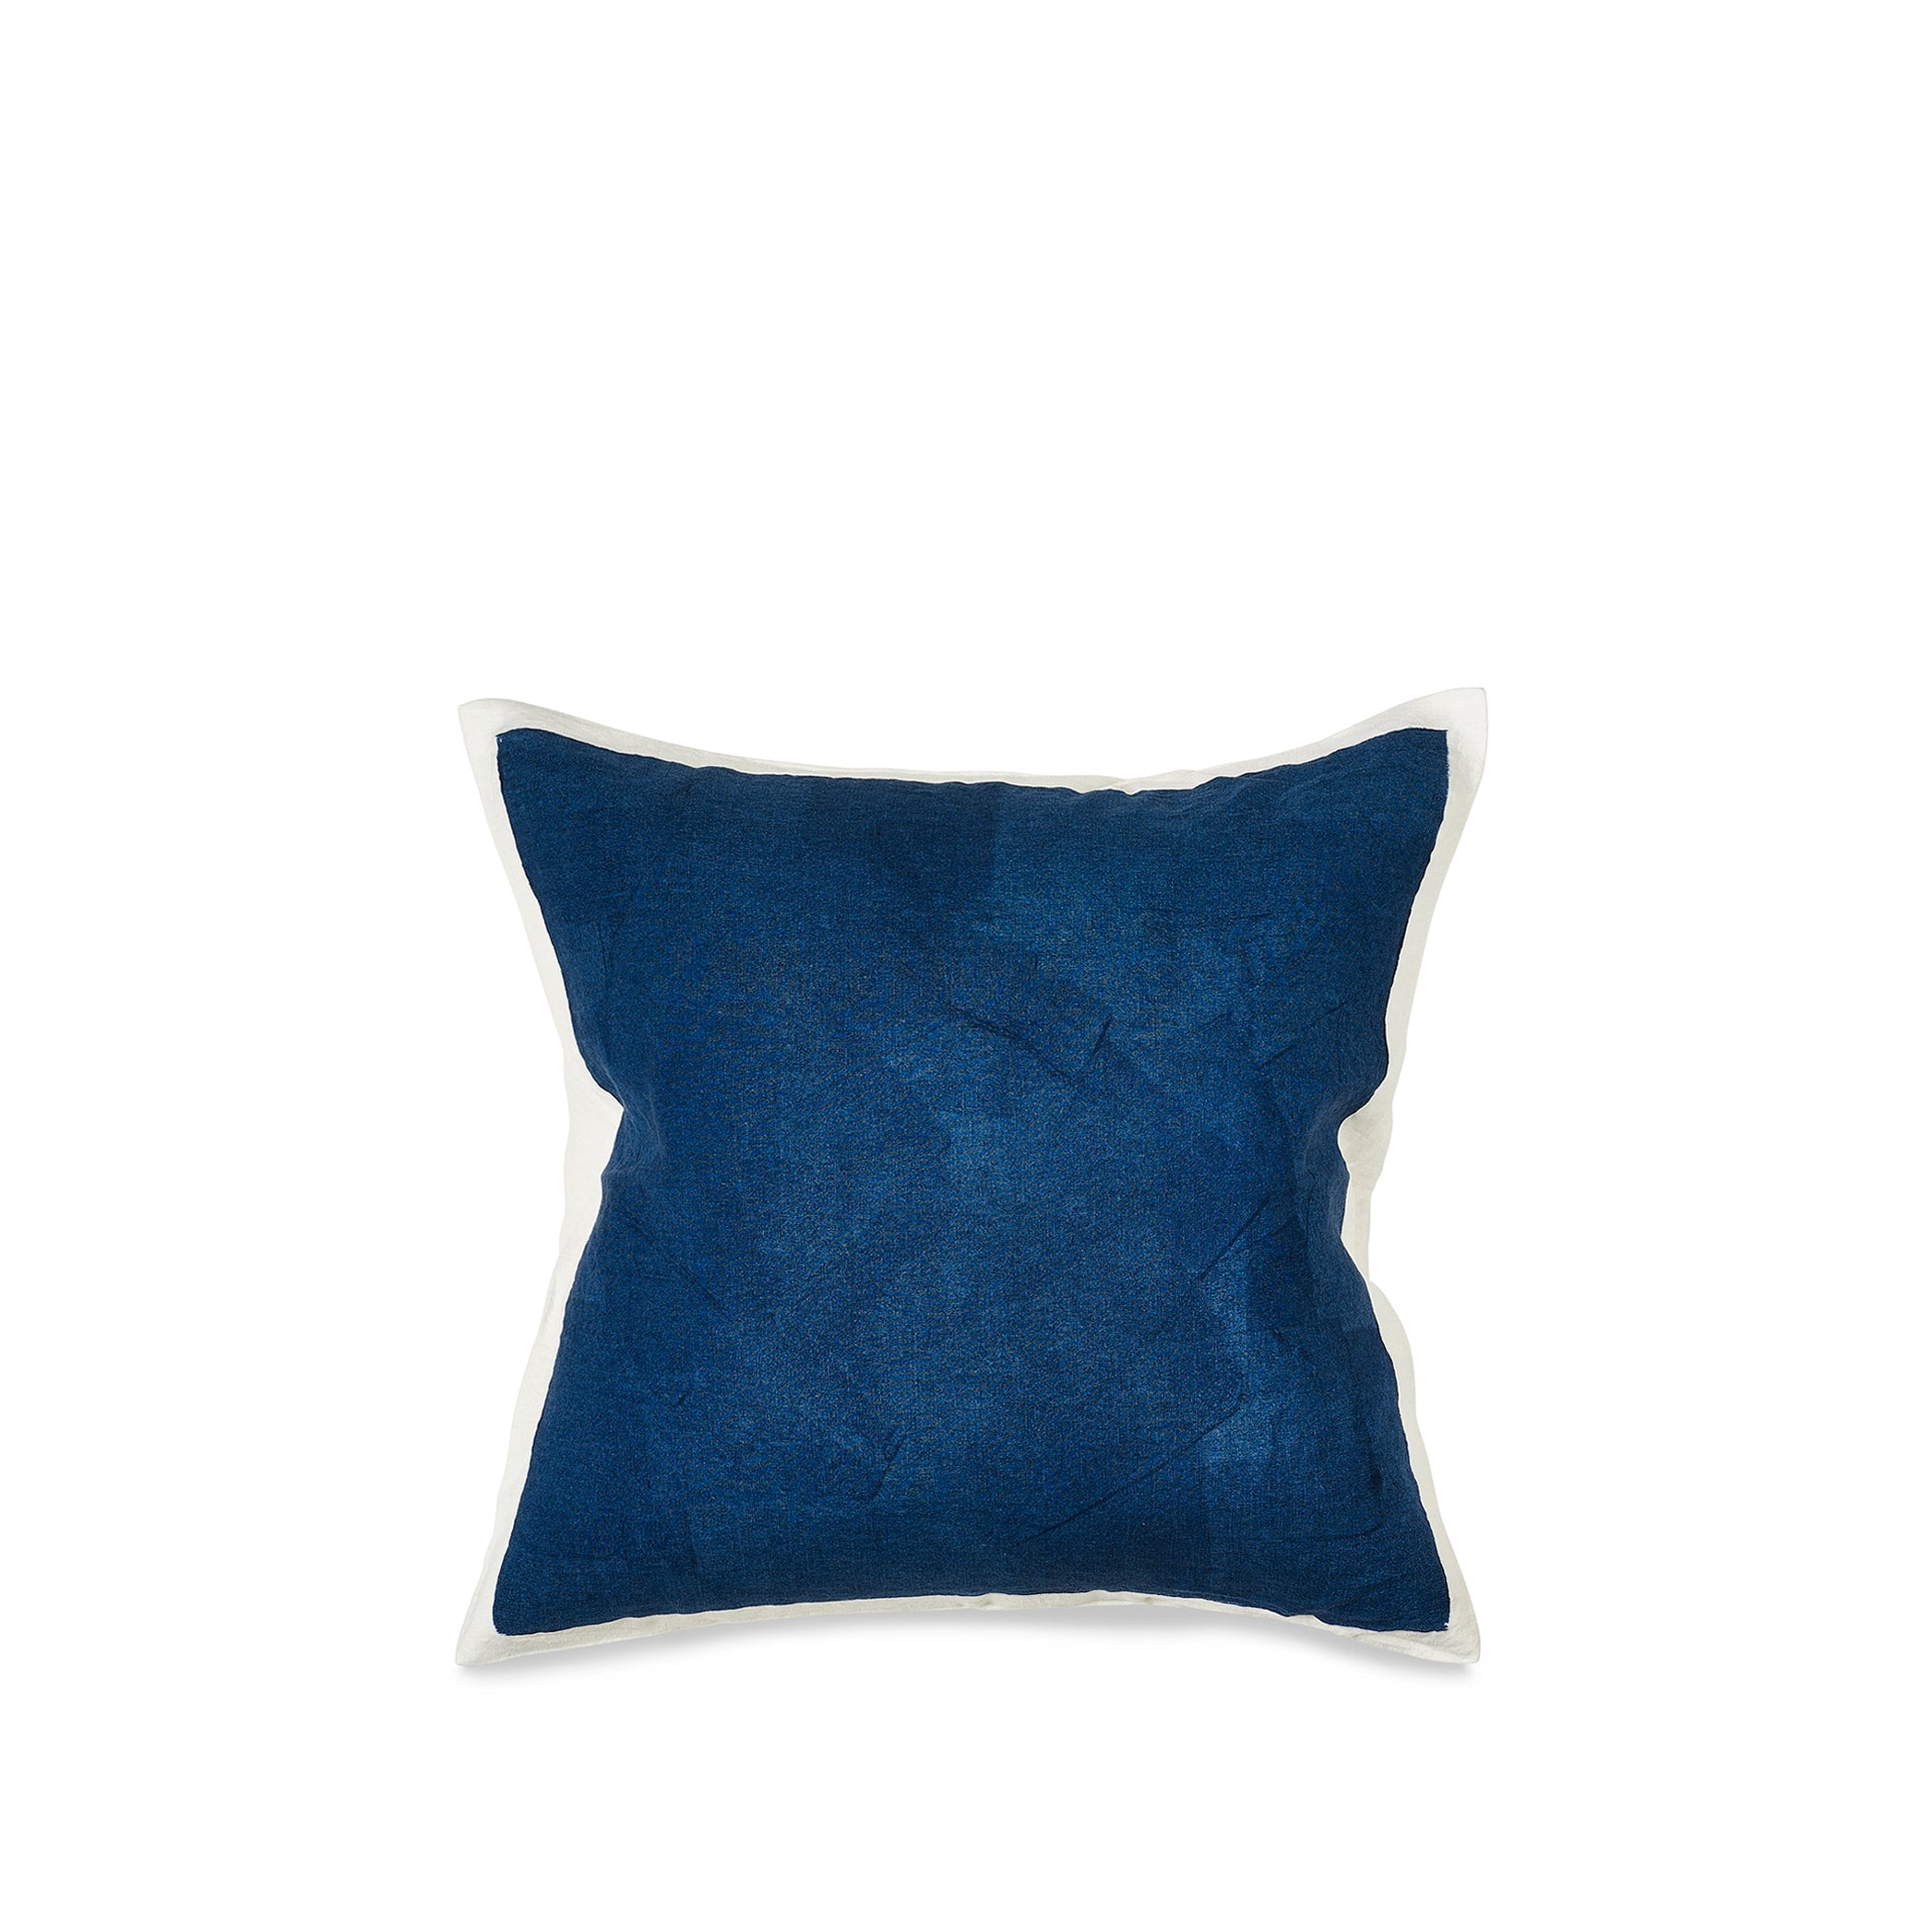 Hand Painted Linen Cushion in Midnight Blue, 50cm x 50cm